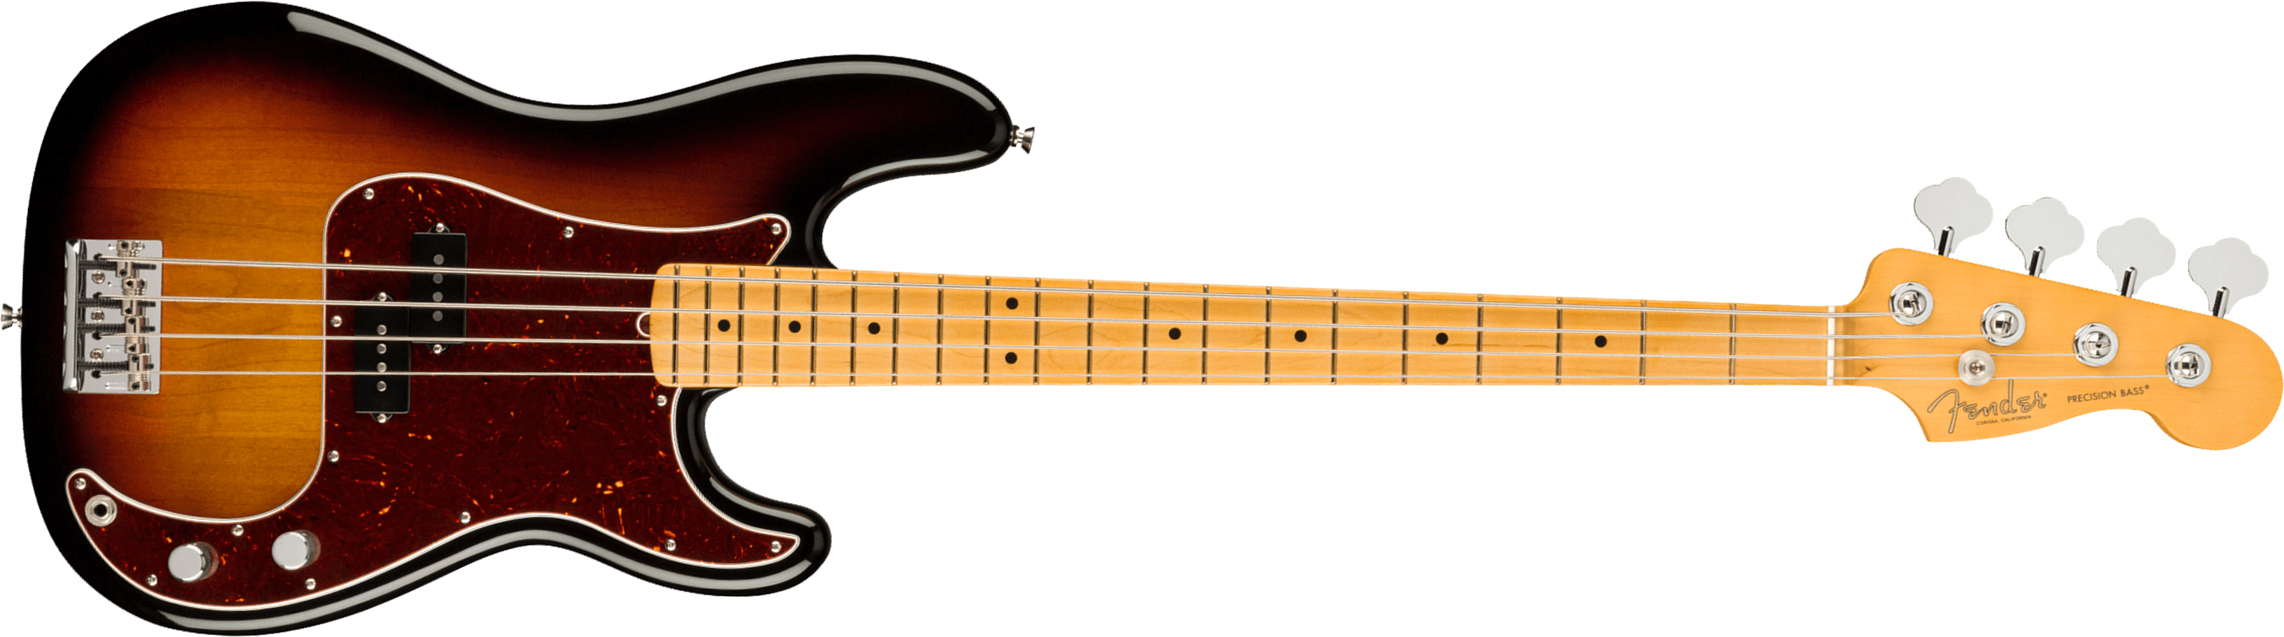 Fender Precision Bass American Professional Ii Usa Mn - 3-color Sunburst - Solid body electric bass - Main picture